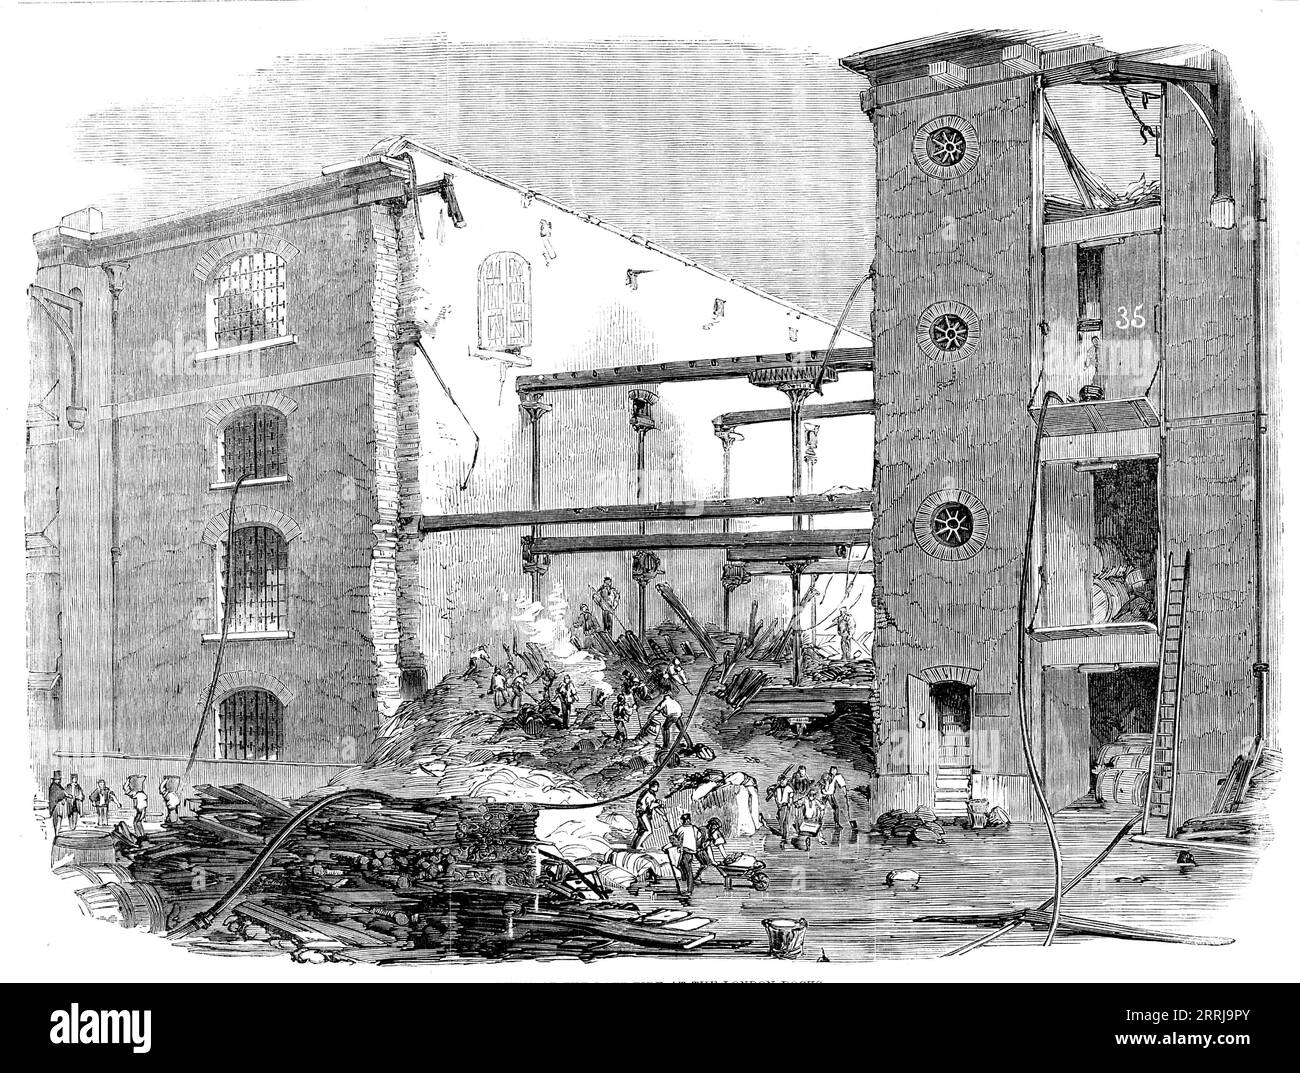 Ruins of the Late Fire at the London Docks, 1858. The fire '...originated in the South Stack Warehouse on the South Quay building, several floors high, each filled with gutta percha, saltpetre, sugar, jute, cider, hemp, ropes, cochineal, saffron, and drugs of great value. To save warehouses containing such combustibles as these proved impossible, and the flames soon got complete possession. The engines arrived very quickly, but torrents of water made no impression on the flames...Just as the conflagration was at its height the gutta percha and indiarubber ran in a state of ignition amongst som Stock Photo